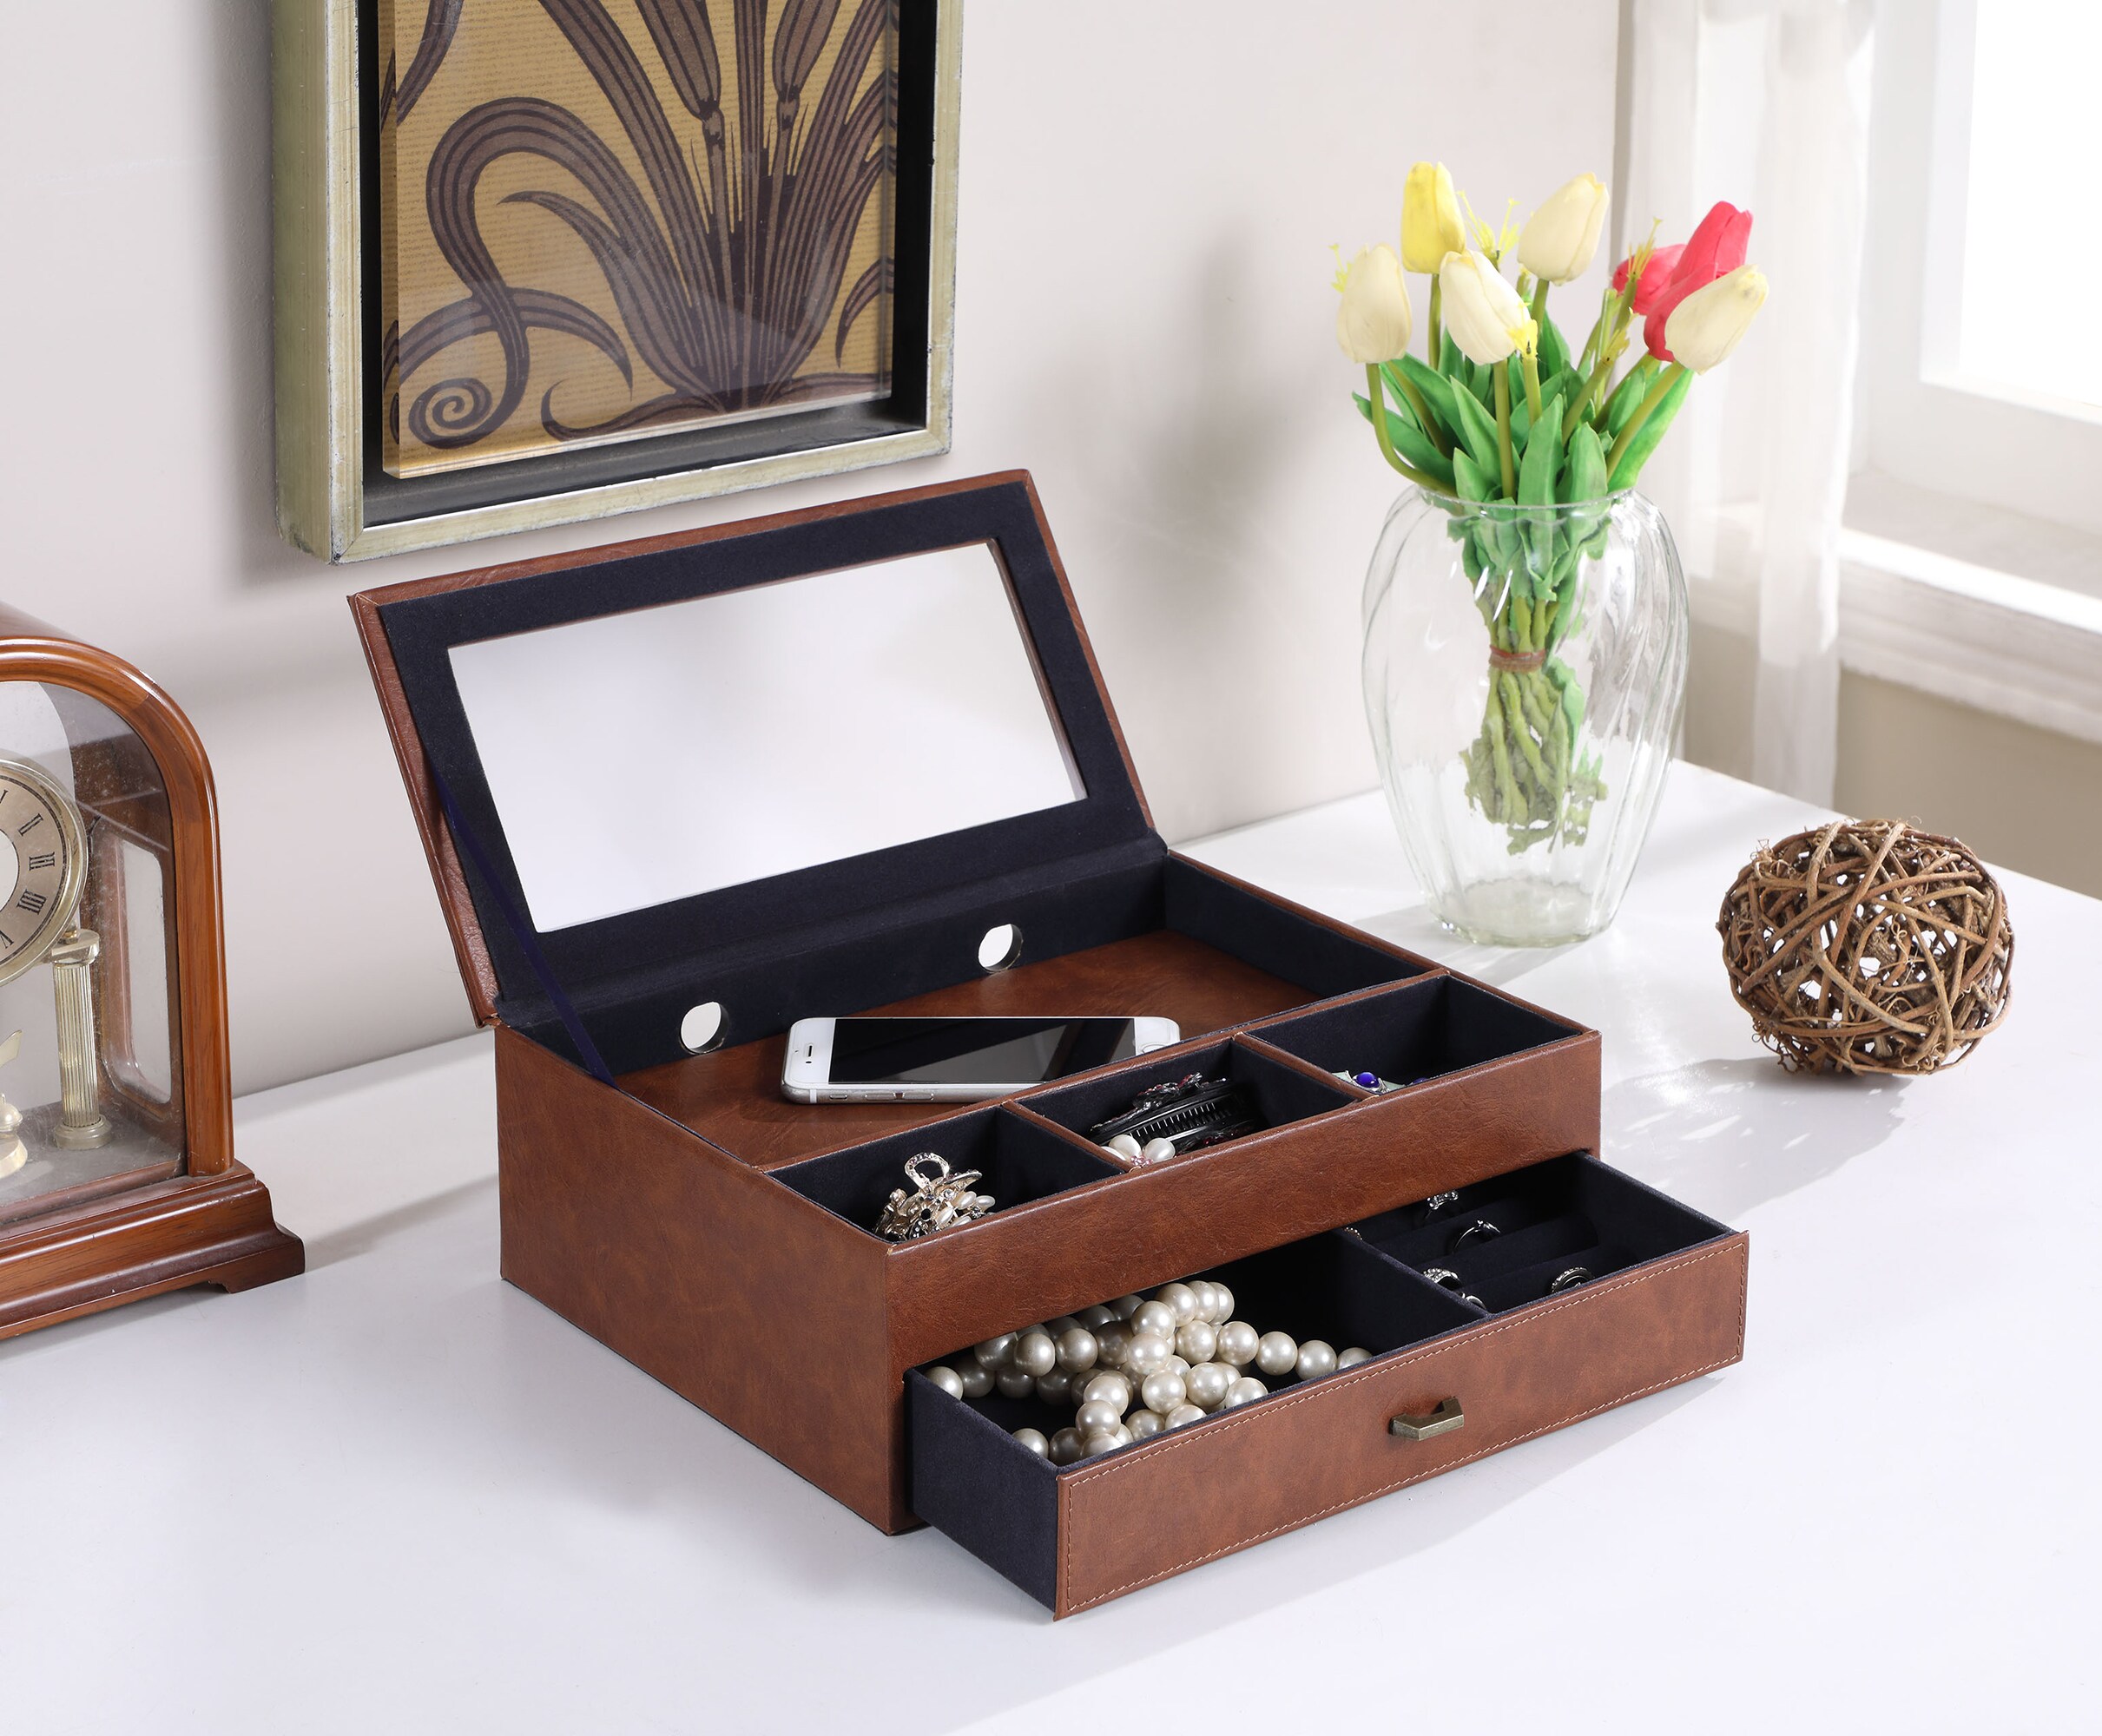 A flowery box for jewelry or other small things